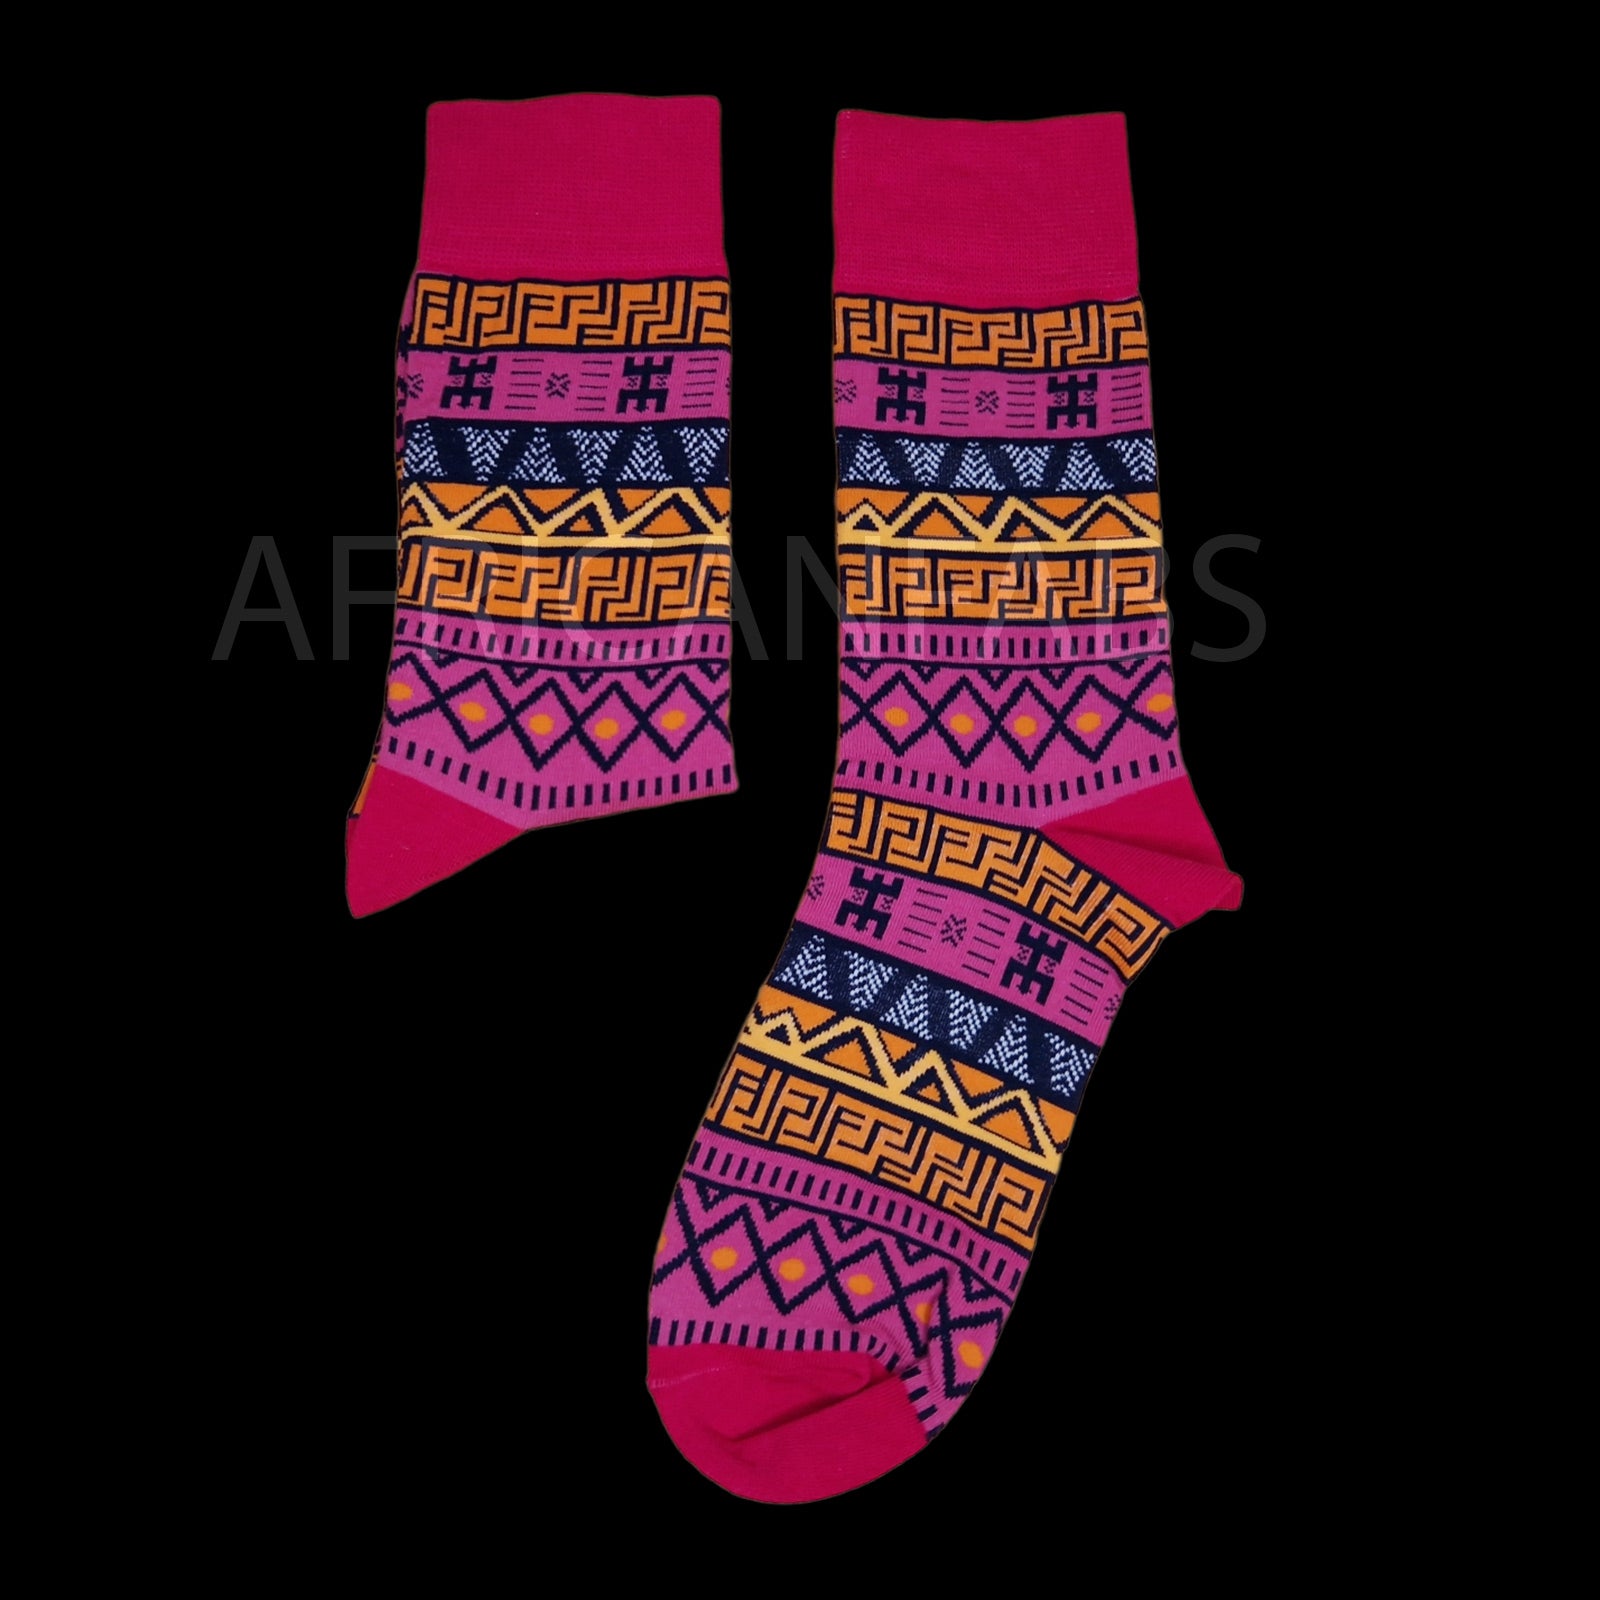 Chaussettes africaines / chaussettes afro / chaussettes Mud - Rose